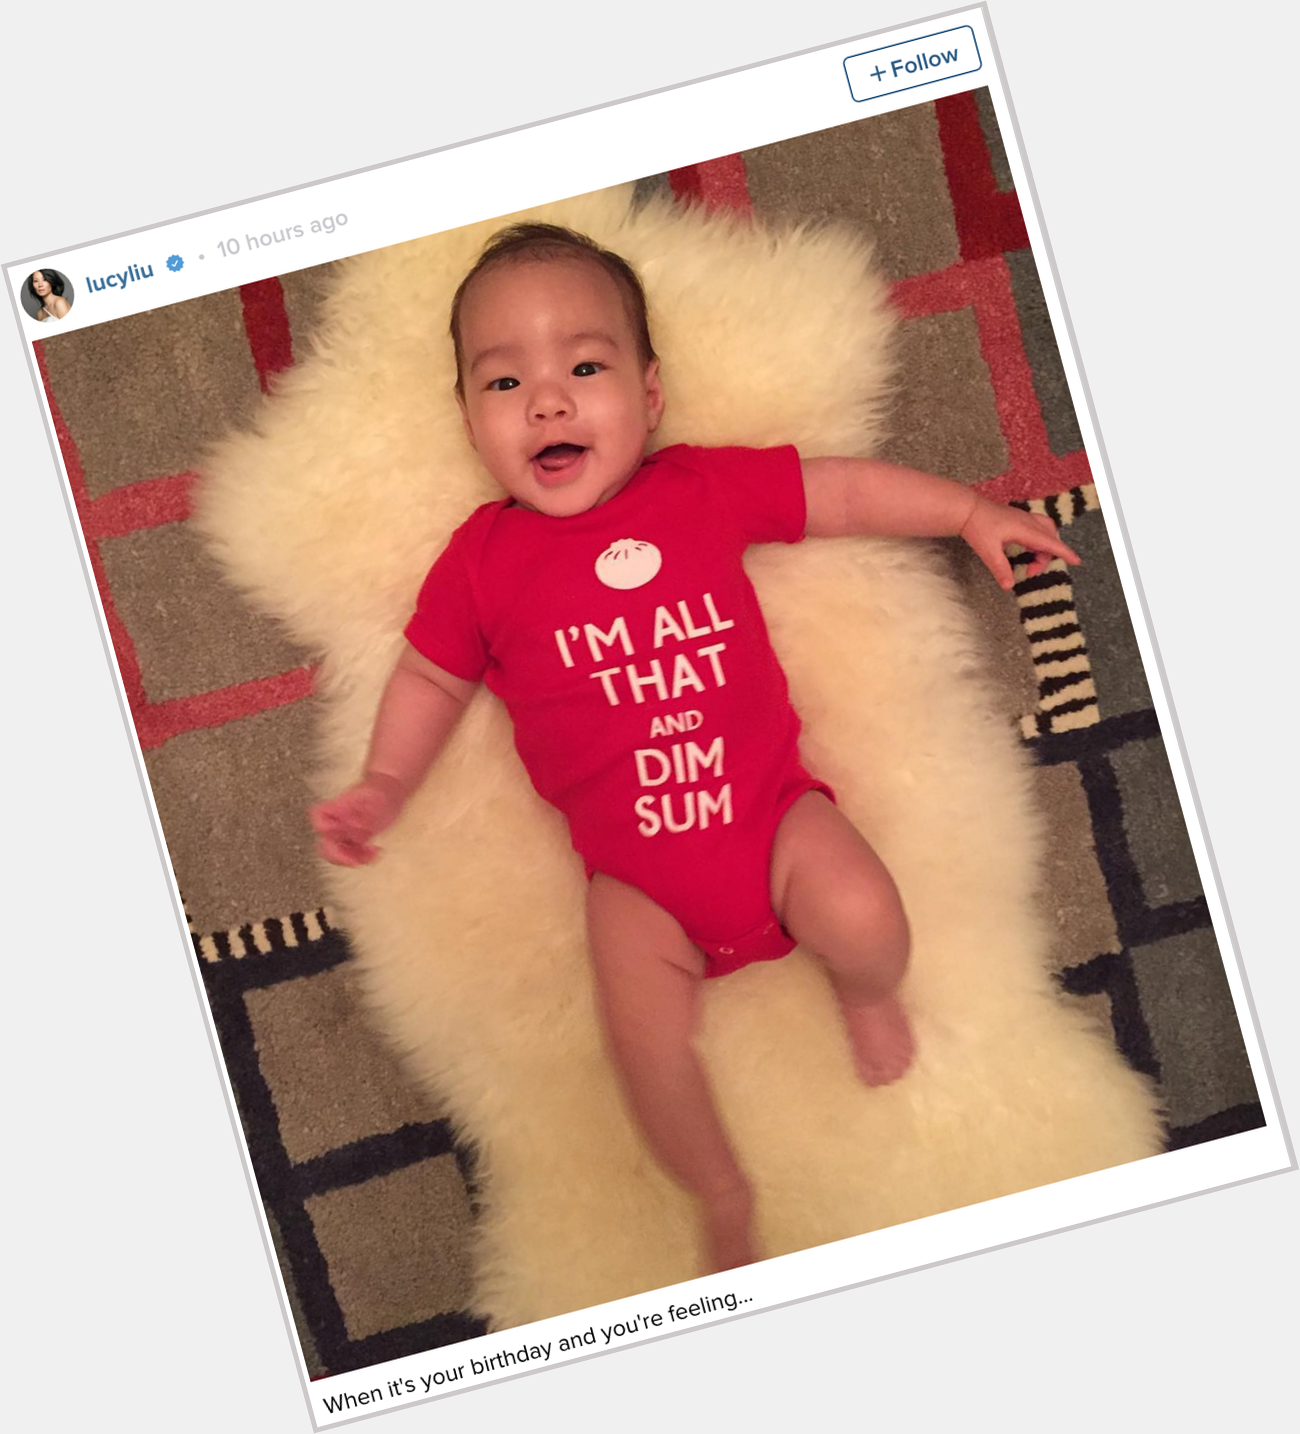 Lucy Liu is celebrating her birthday with her baby son. Happy Birthday  